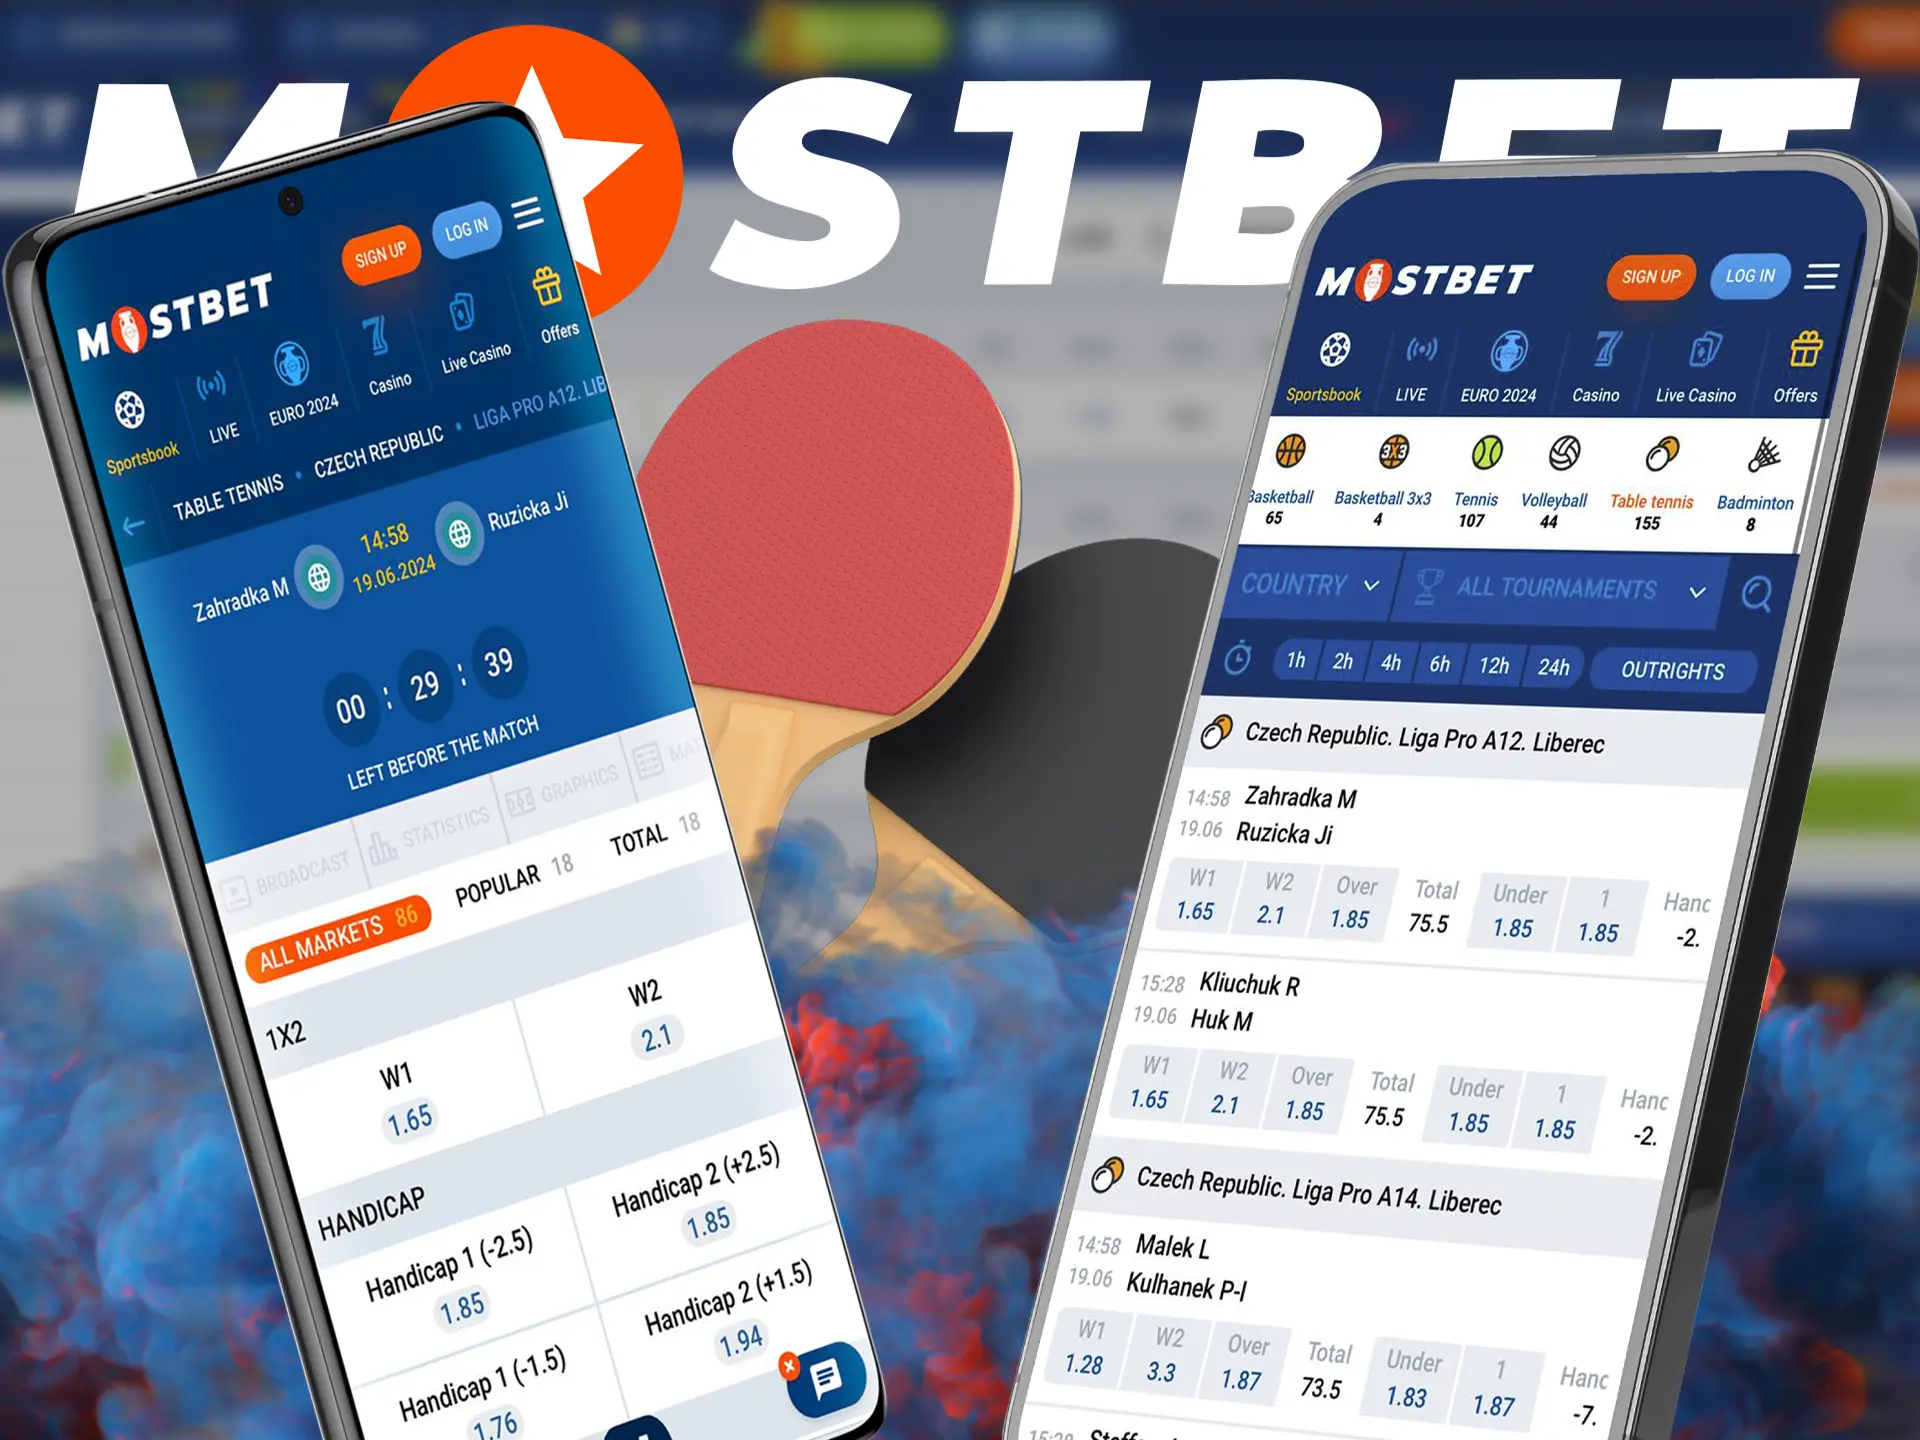 Use the Mostbet mobile app to have quick access to betting on the best table tennis events.